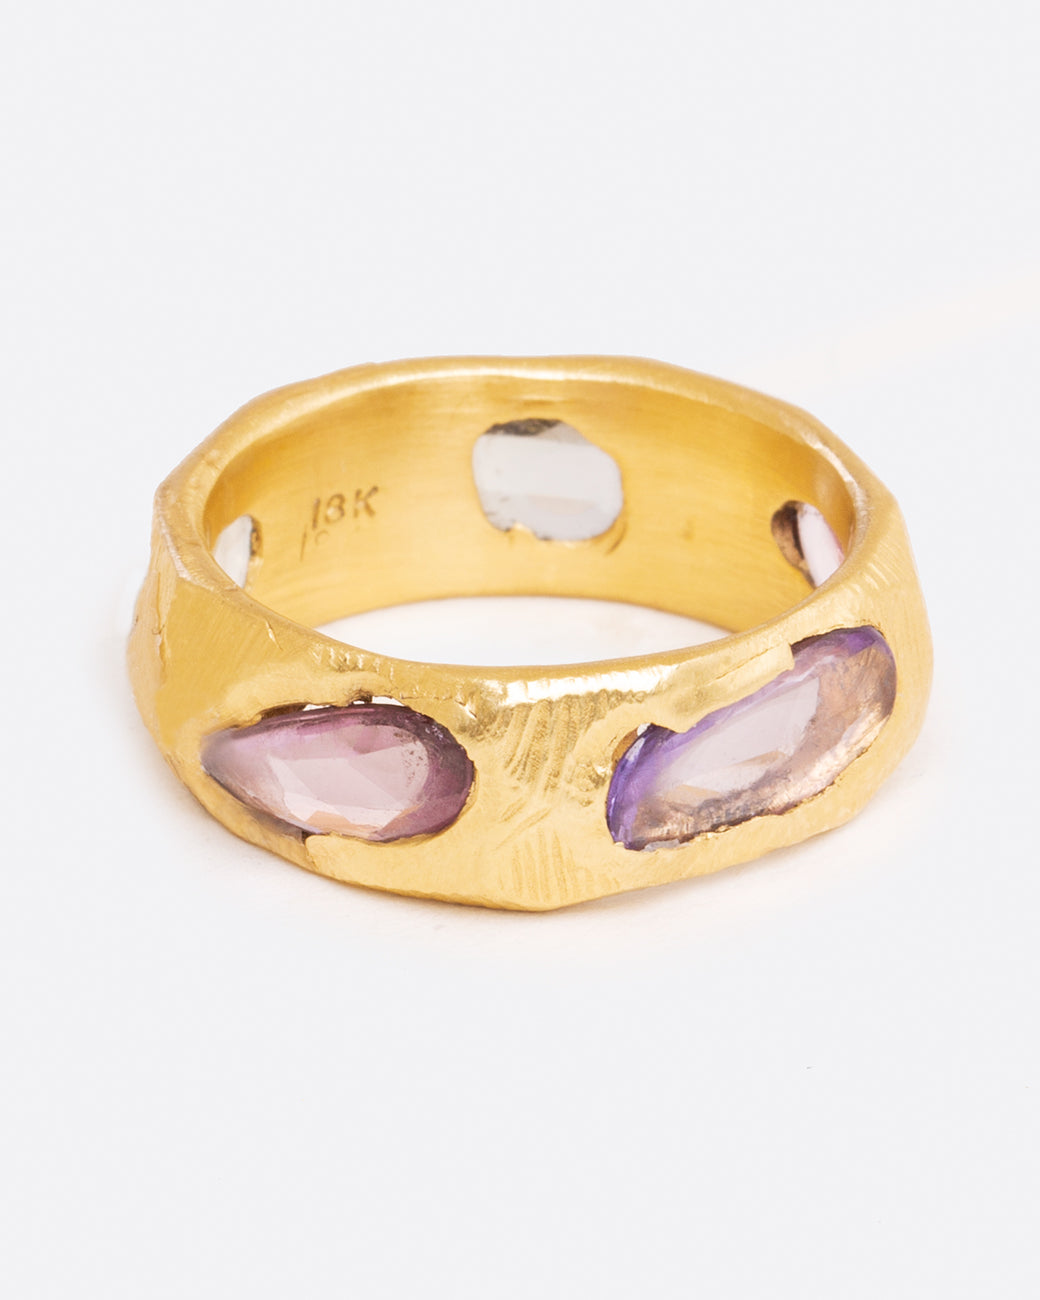 Brushed gold sapphire band with purple sapphires, shown from the front.